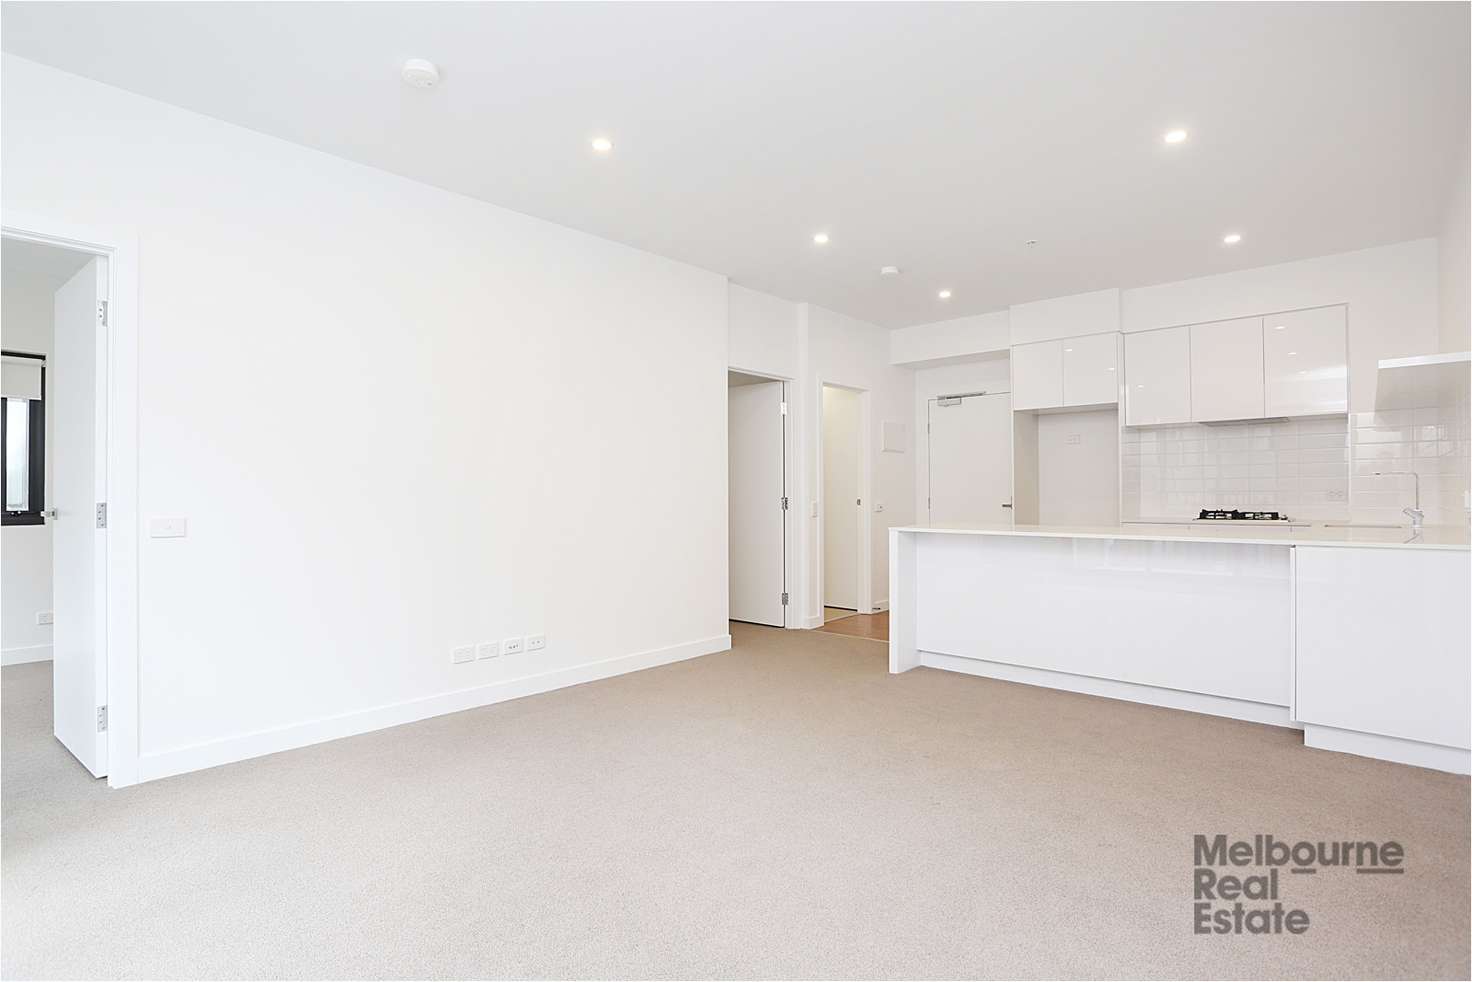 Main view of Homely apartment listing, 208/8 Olive York Way, Brunswick West VIC 3055